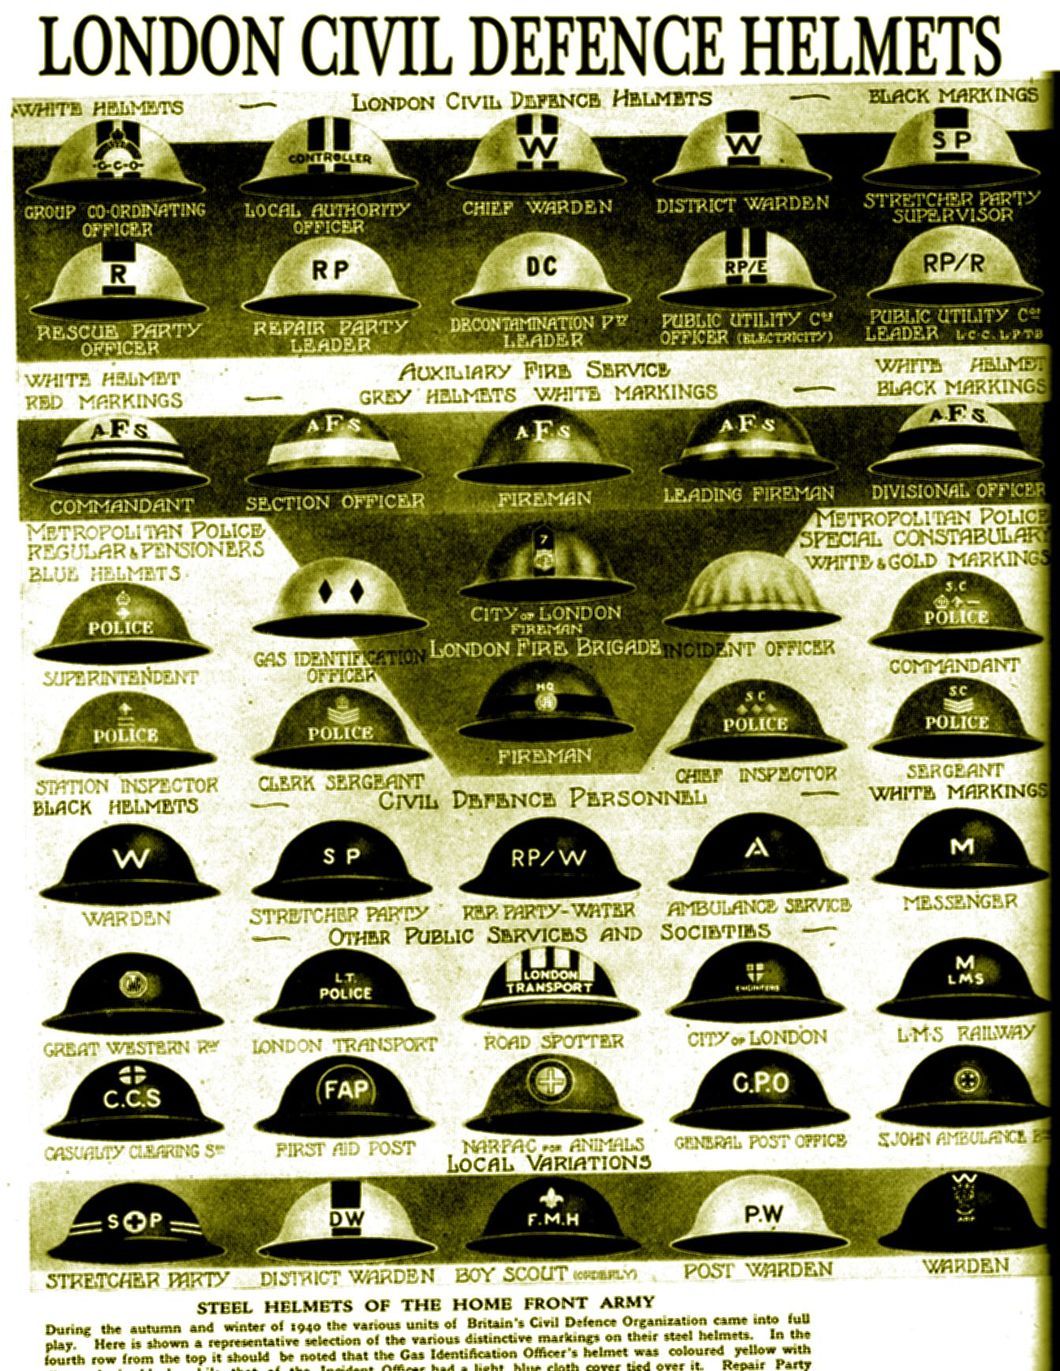 Chart of London Civil Defence Helmets in WW2